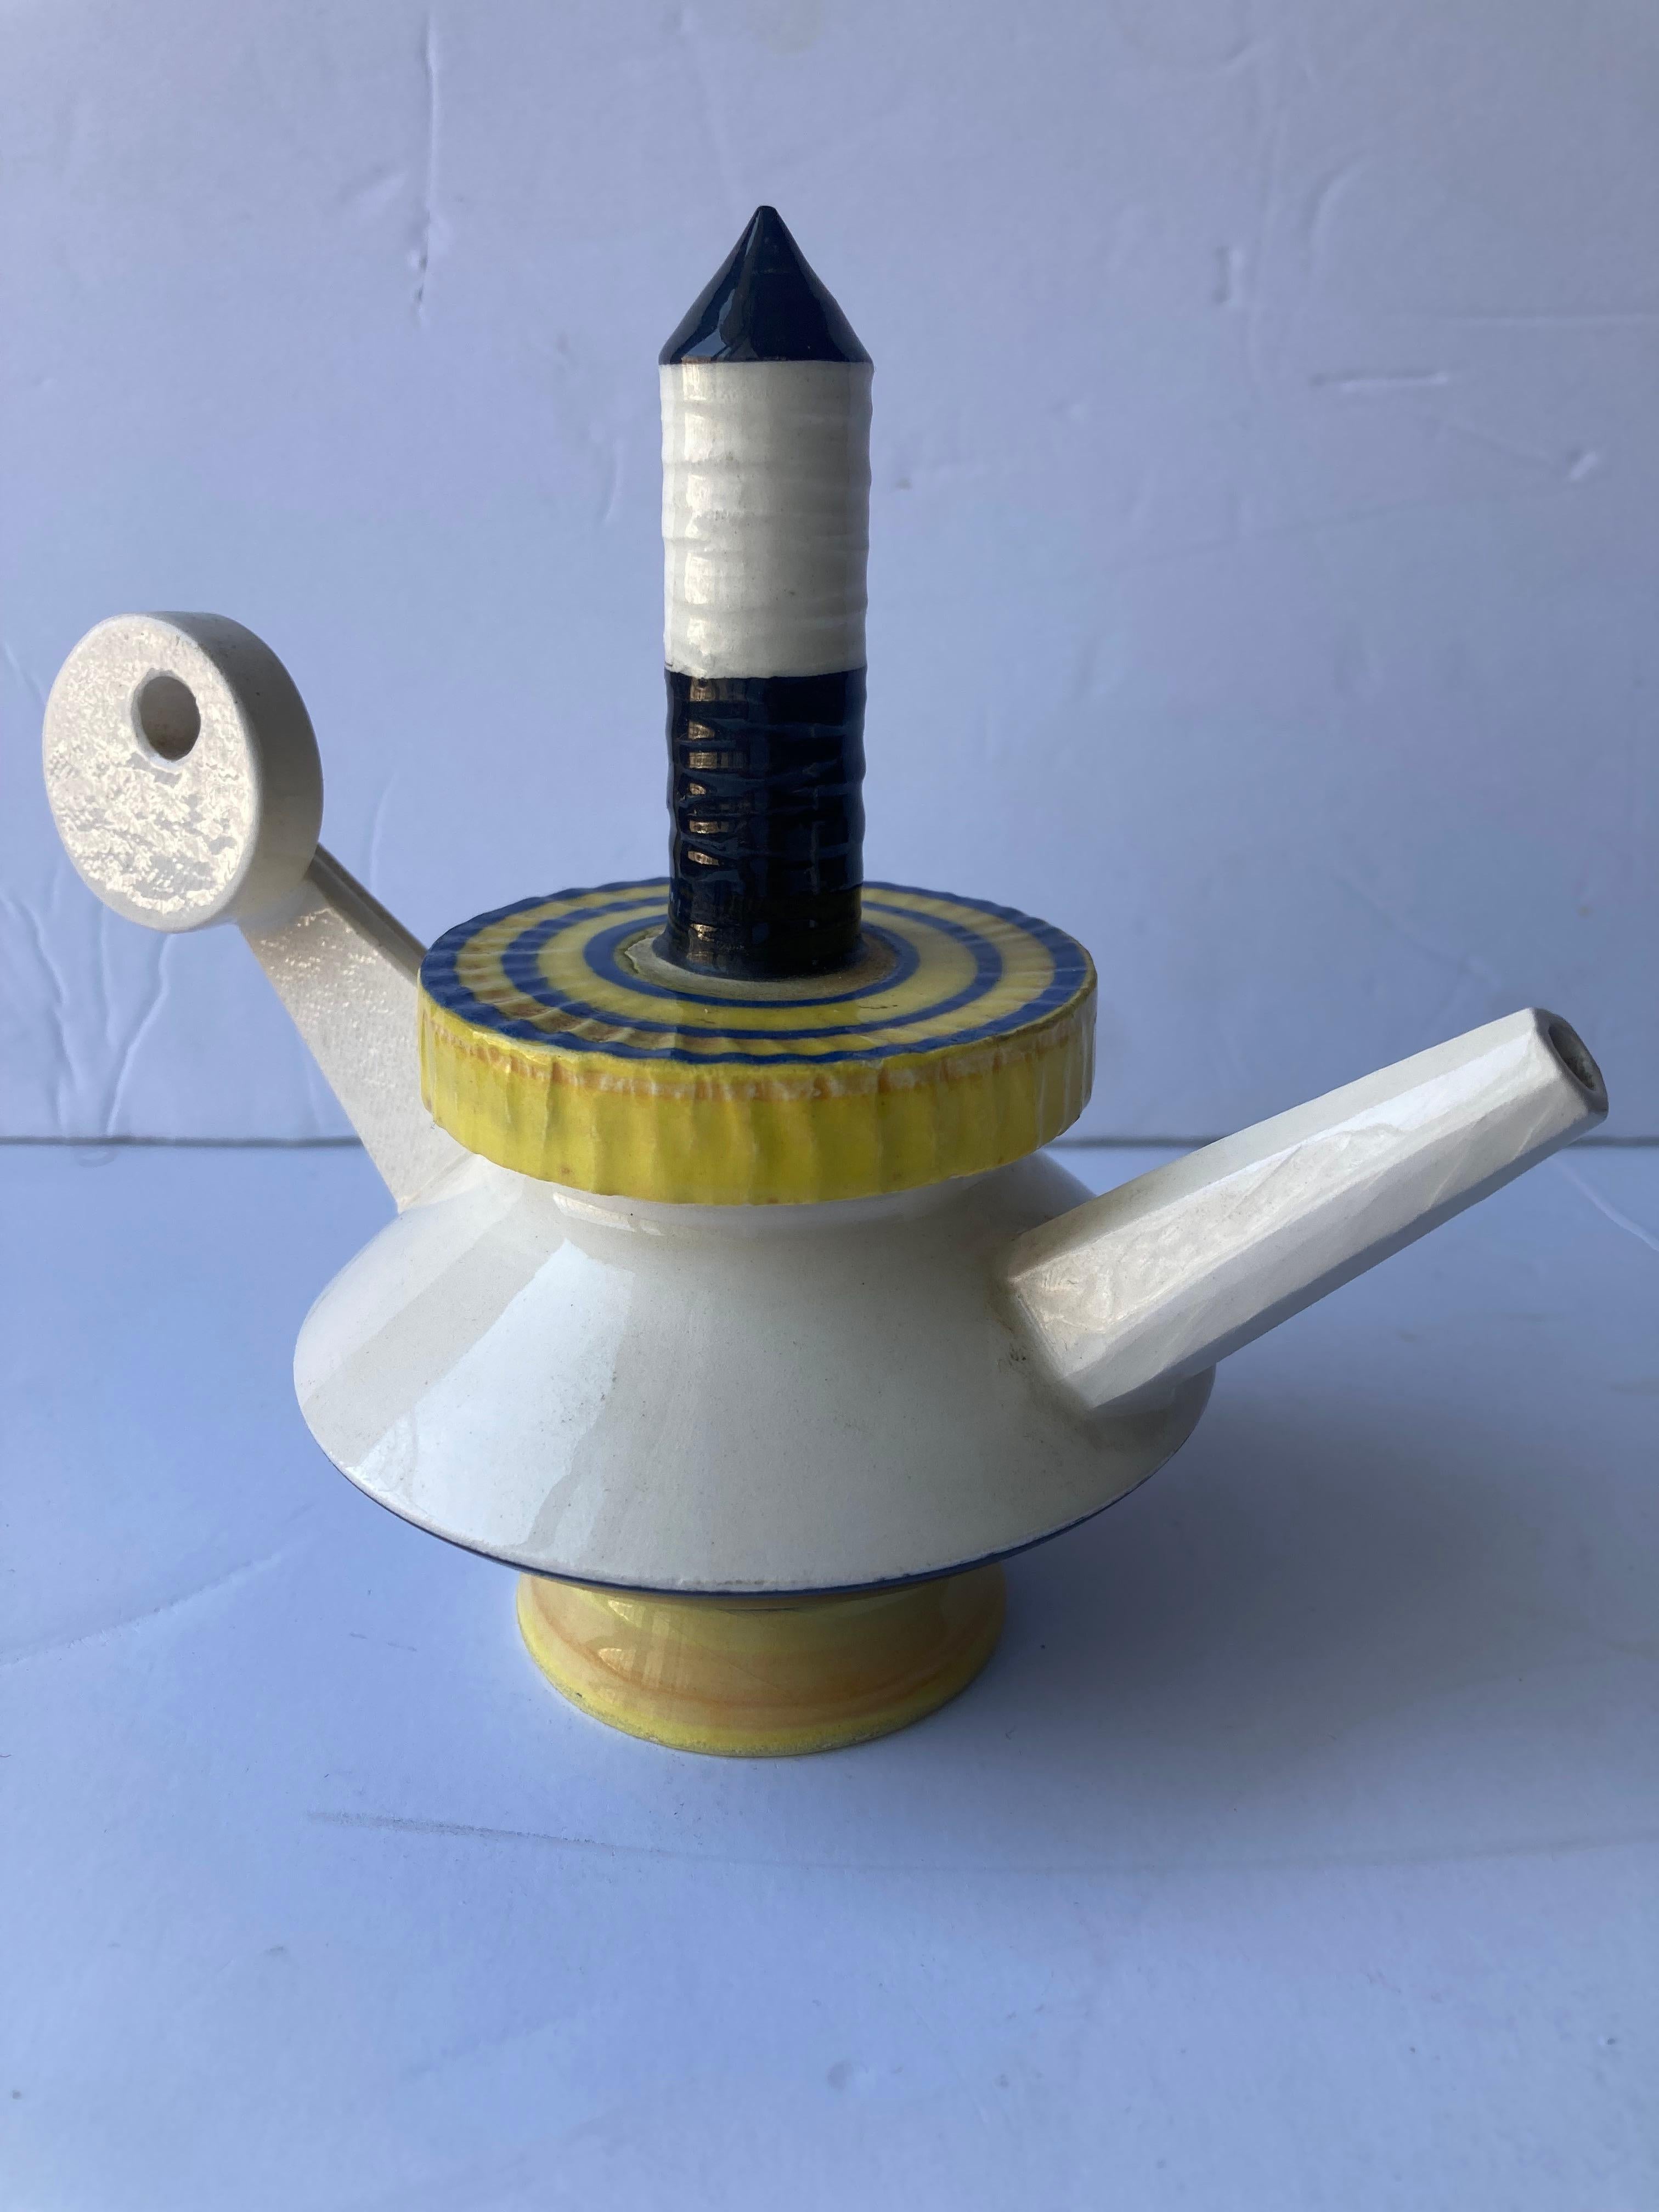 Beautiful post modern , Memphis style ceramic teapot for the well artist Peter Shire , signed EXP 1999 . He is known for the teapots .